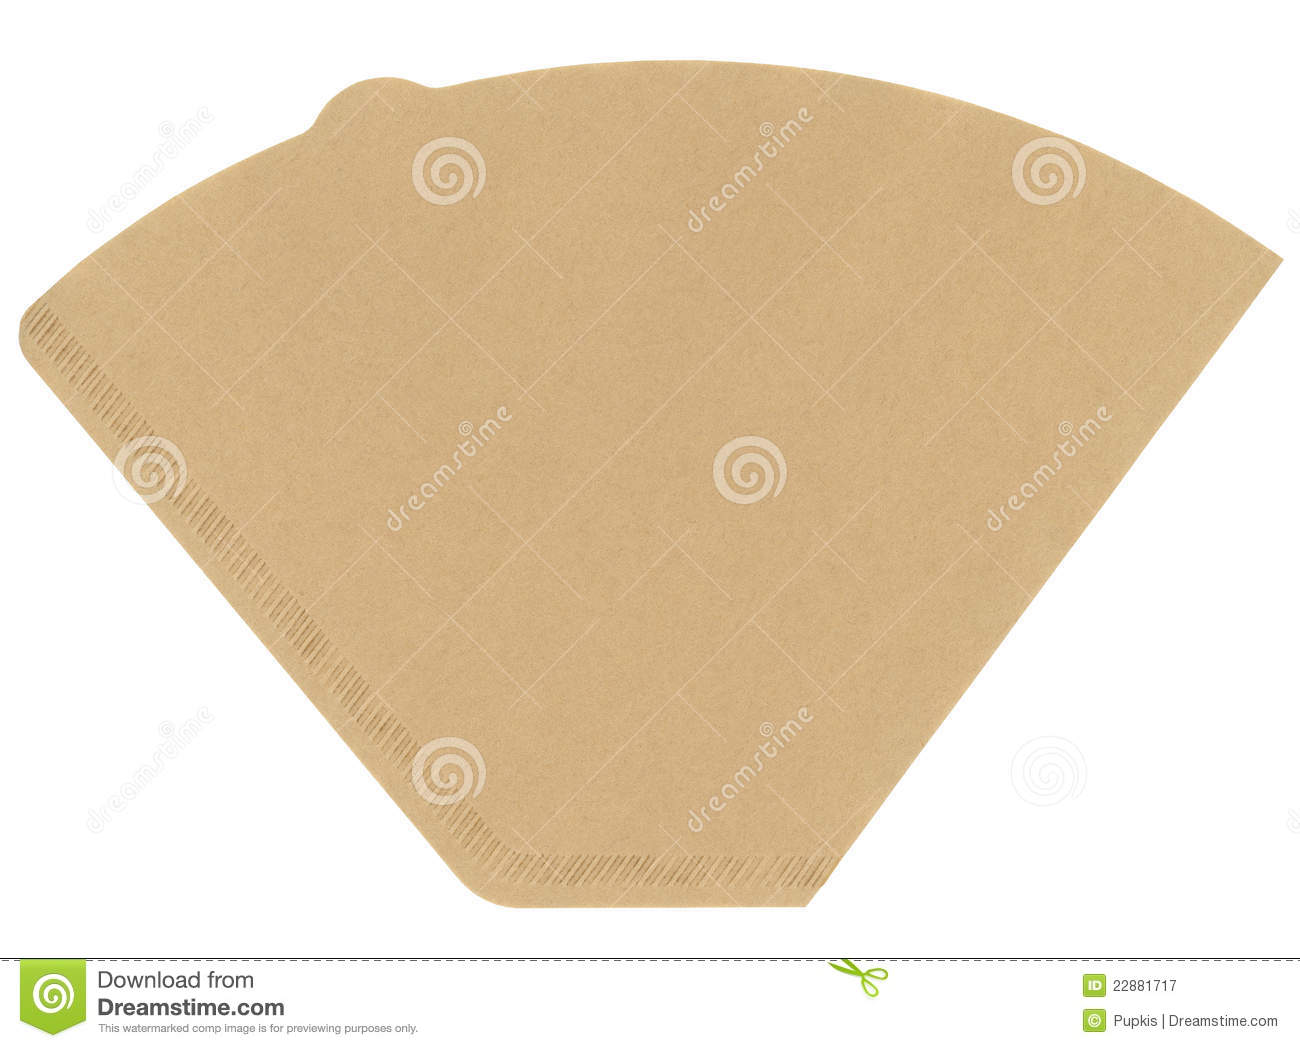 Coffee Filter Royalty Free Stock Photography   Image  22881717